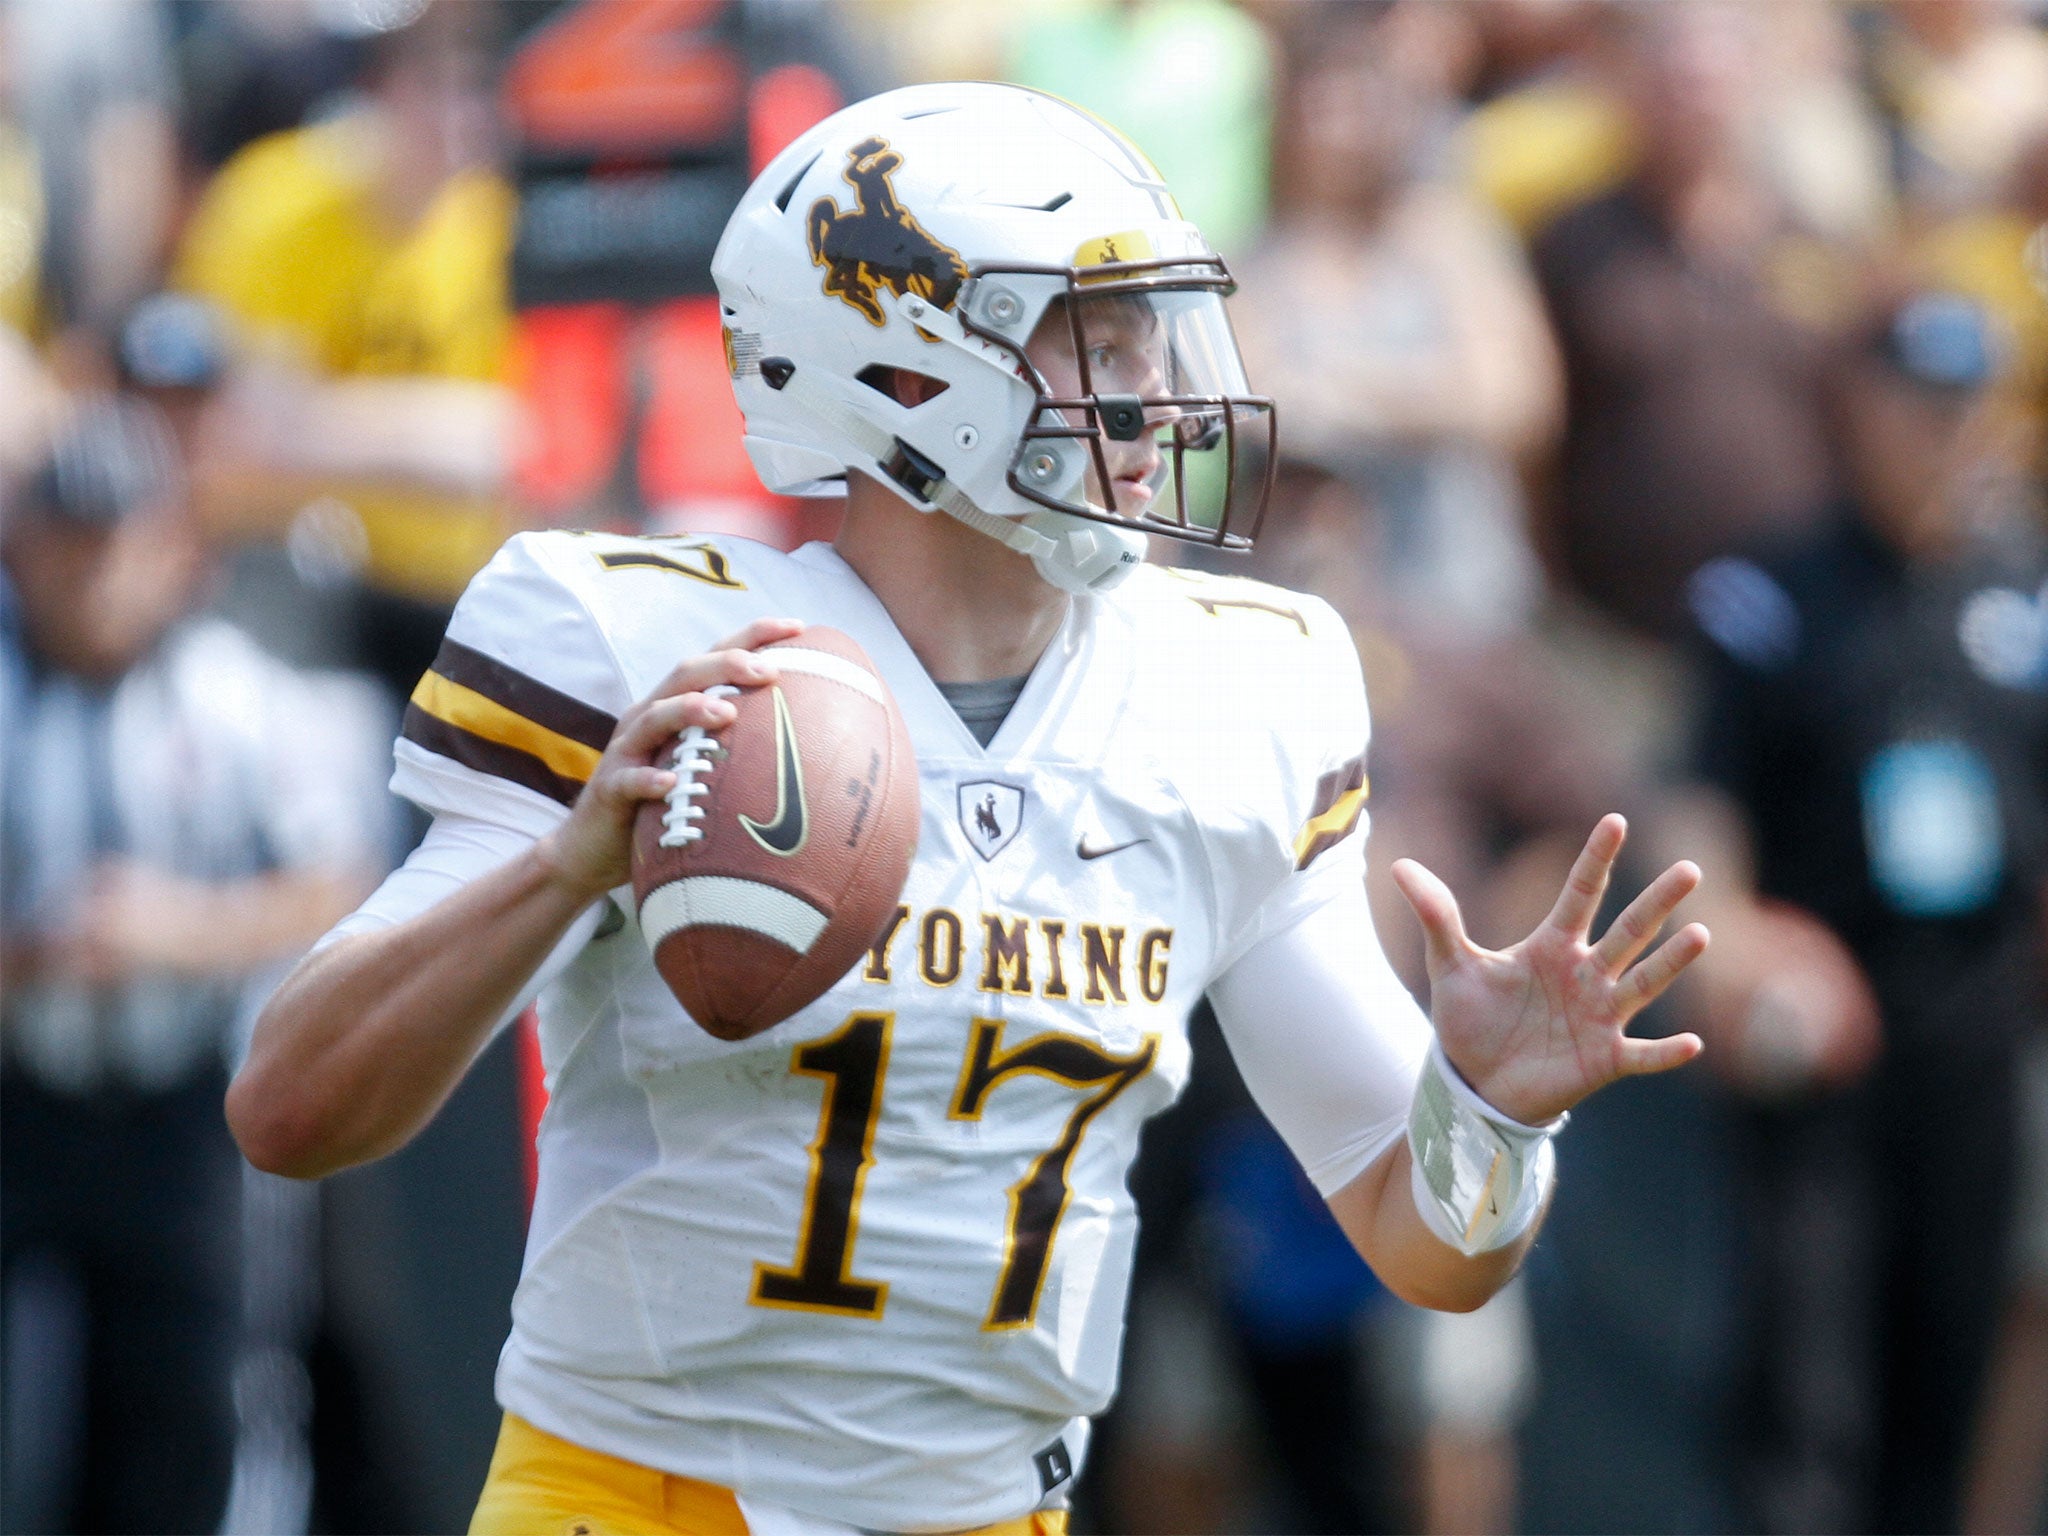 Josh Allen is a polarising prospect whose inaccuracy may cause him problems